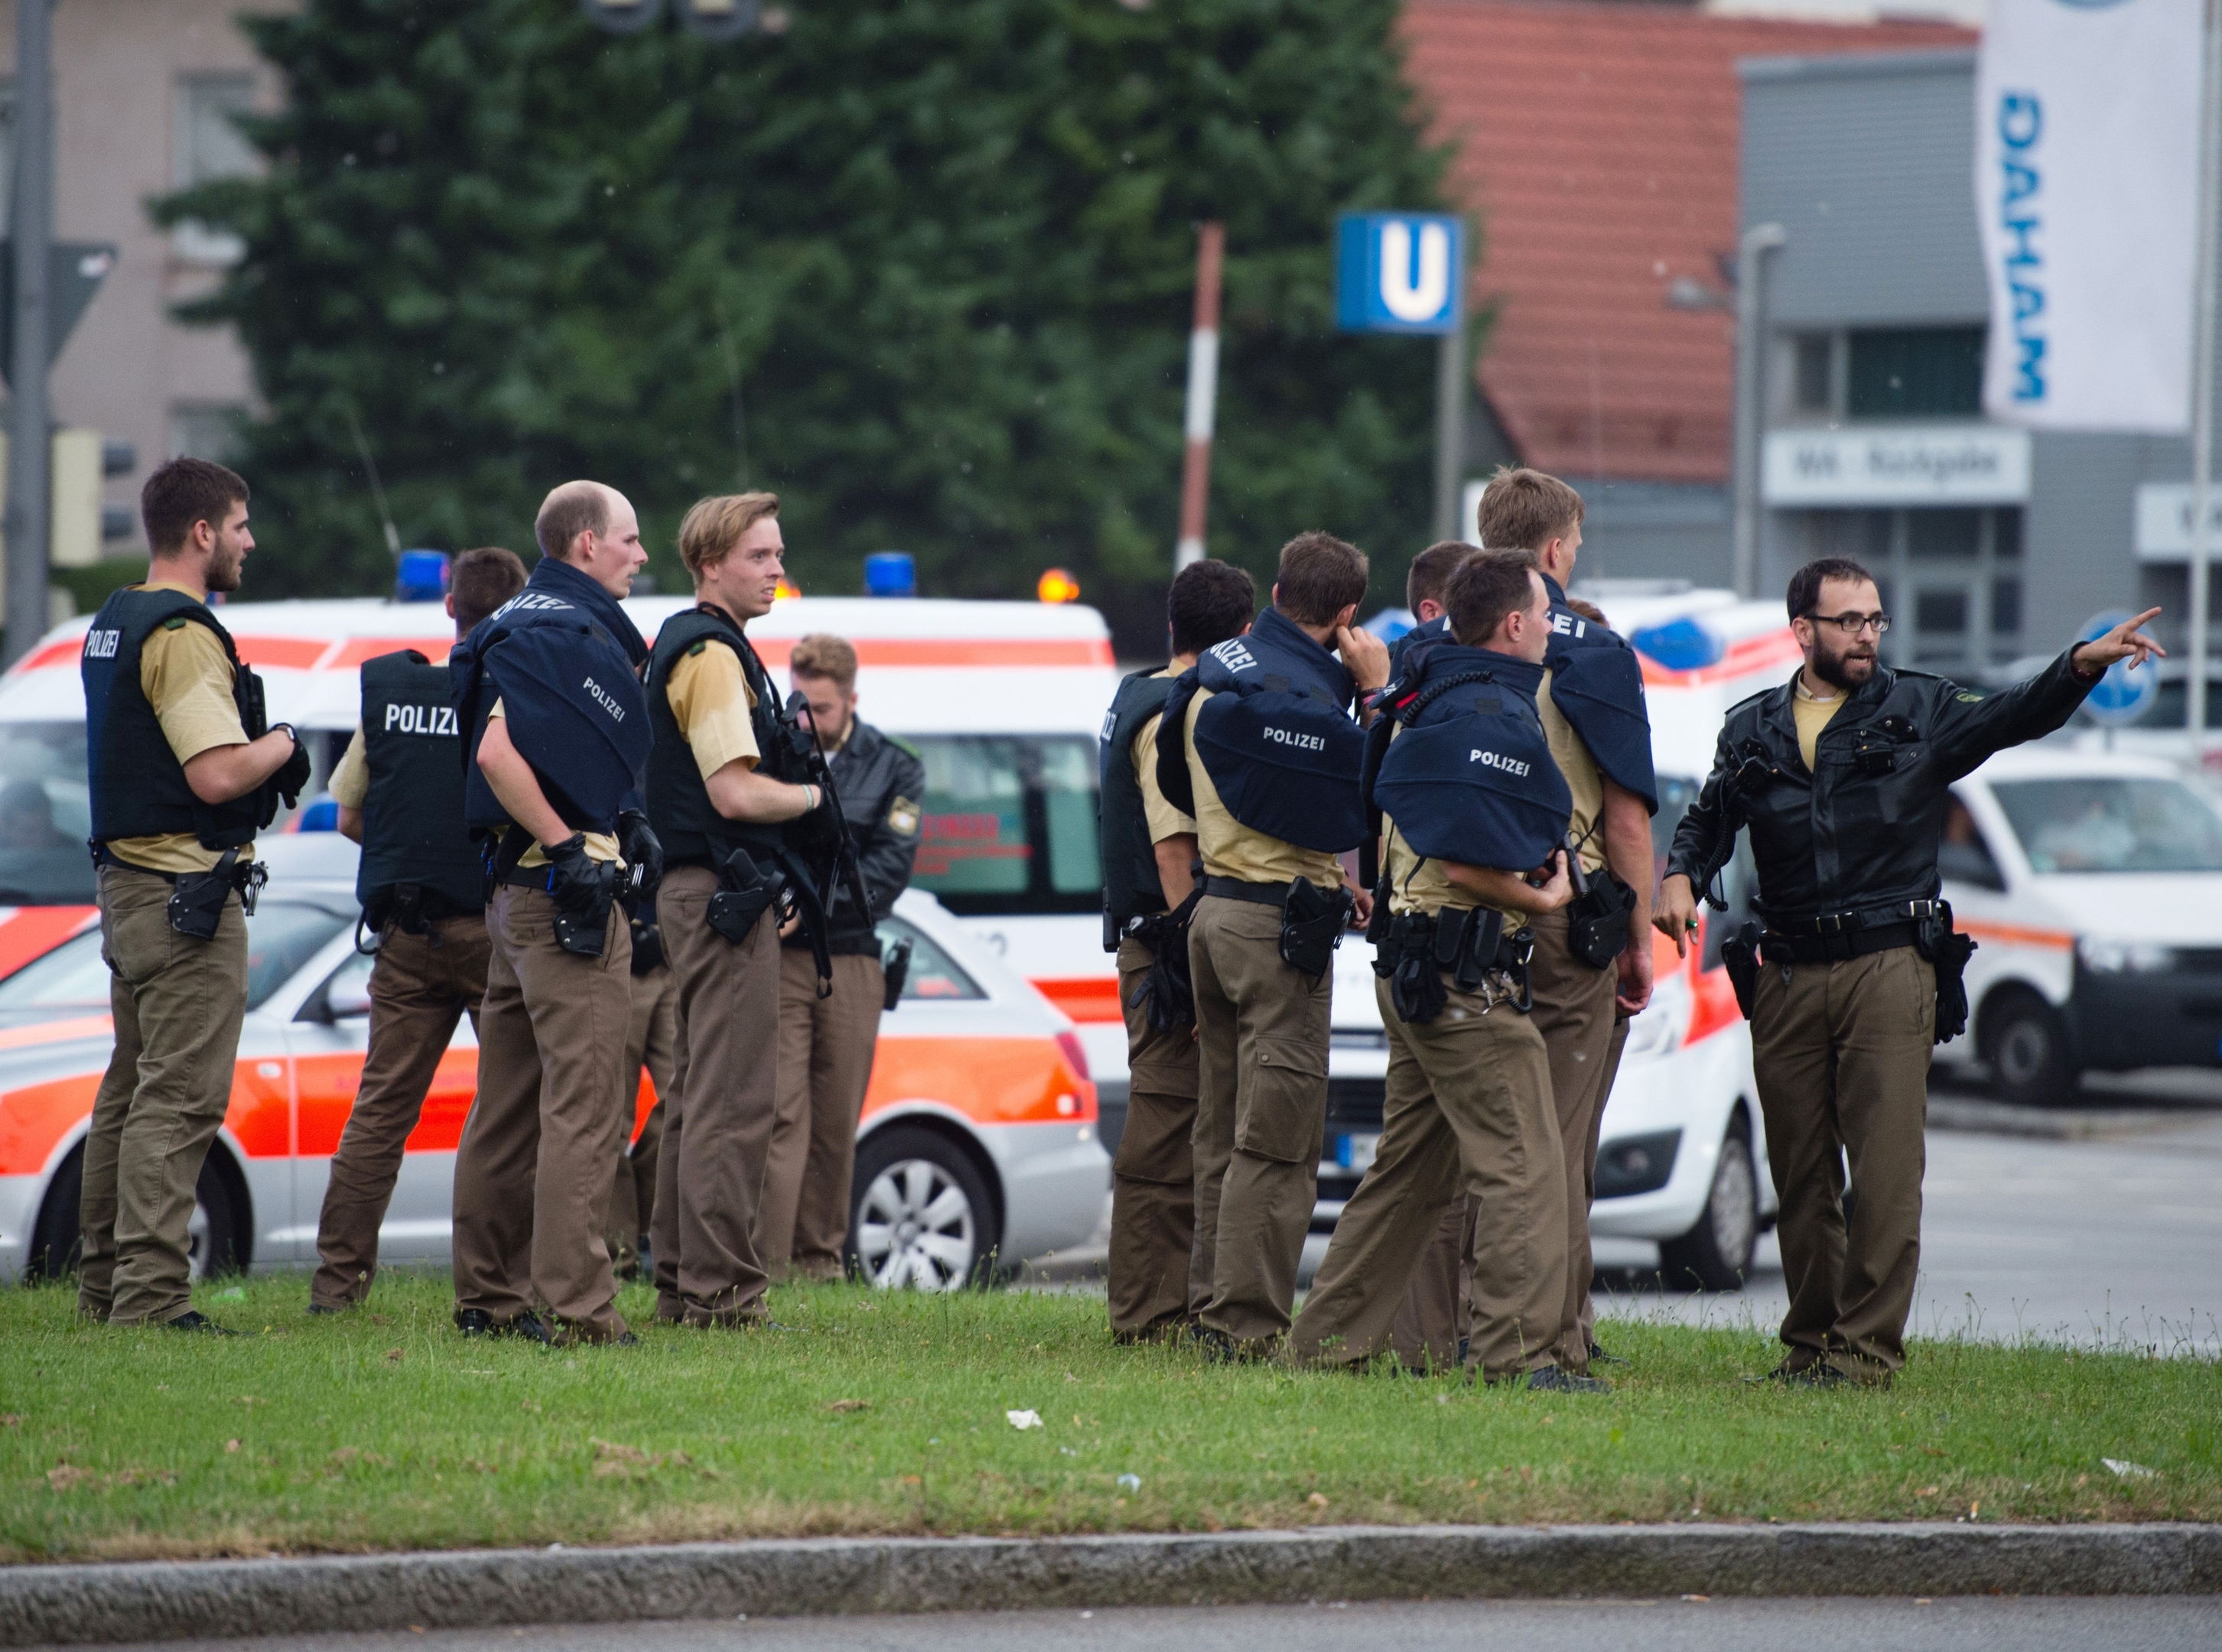 Policemen arrive at a shopping centre in which a shooting was reported in Munich, southern Germany, Friday, July 22, 2016. Situation after a shooting in the Olympia shopping centre in Munich is unclear. (Matthias Balk/dpa via AP)